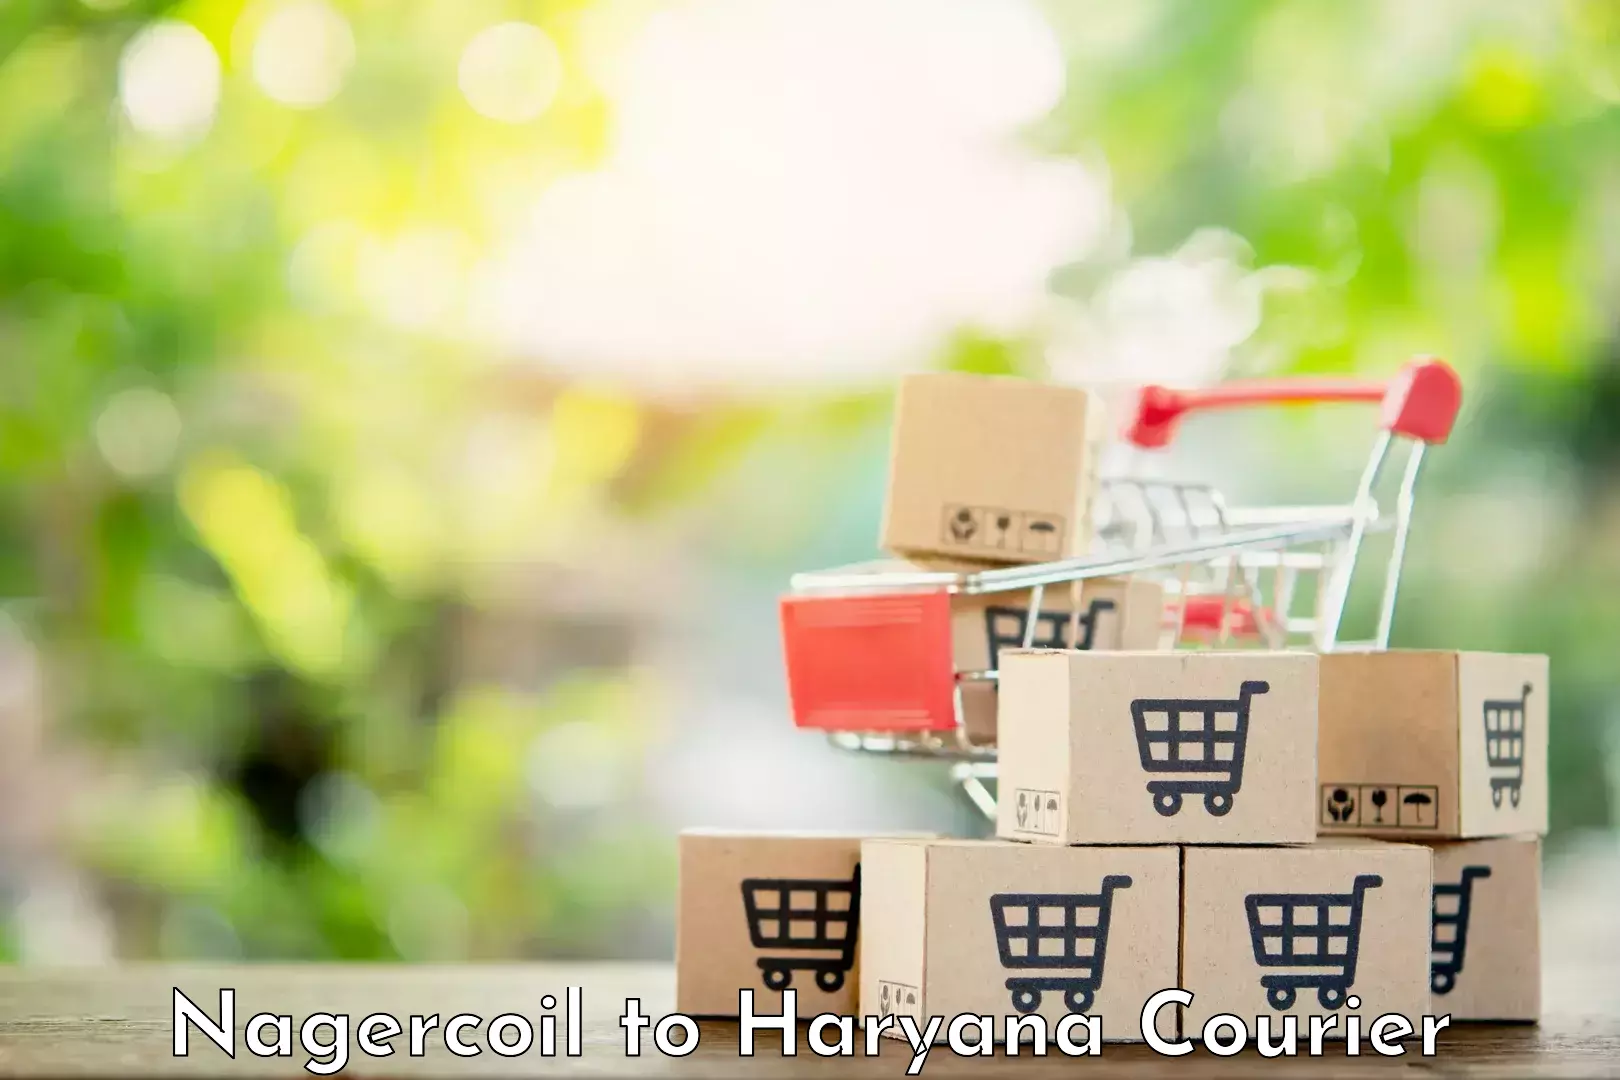 Quality courier partnerships Nagercoil to Panchkula